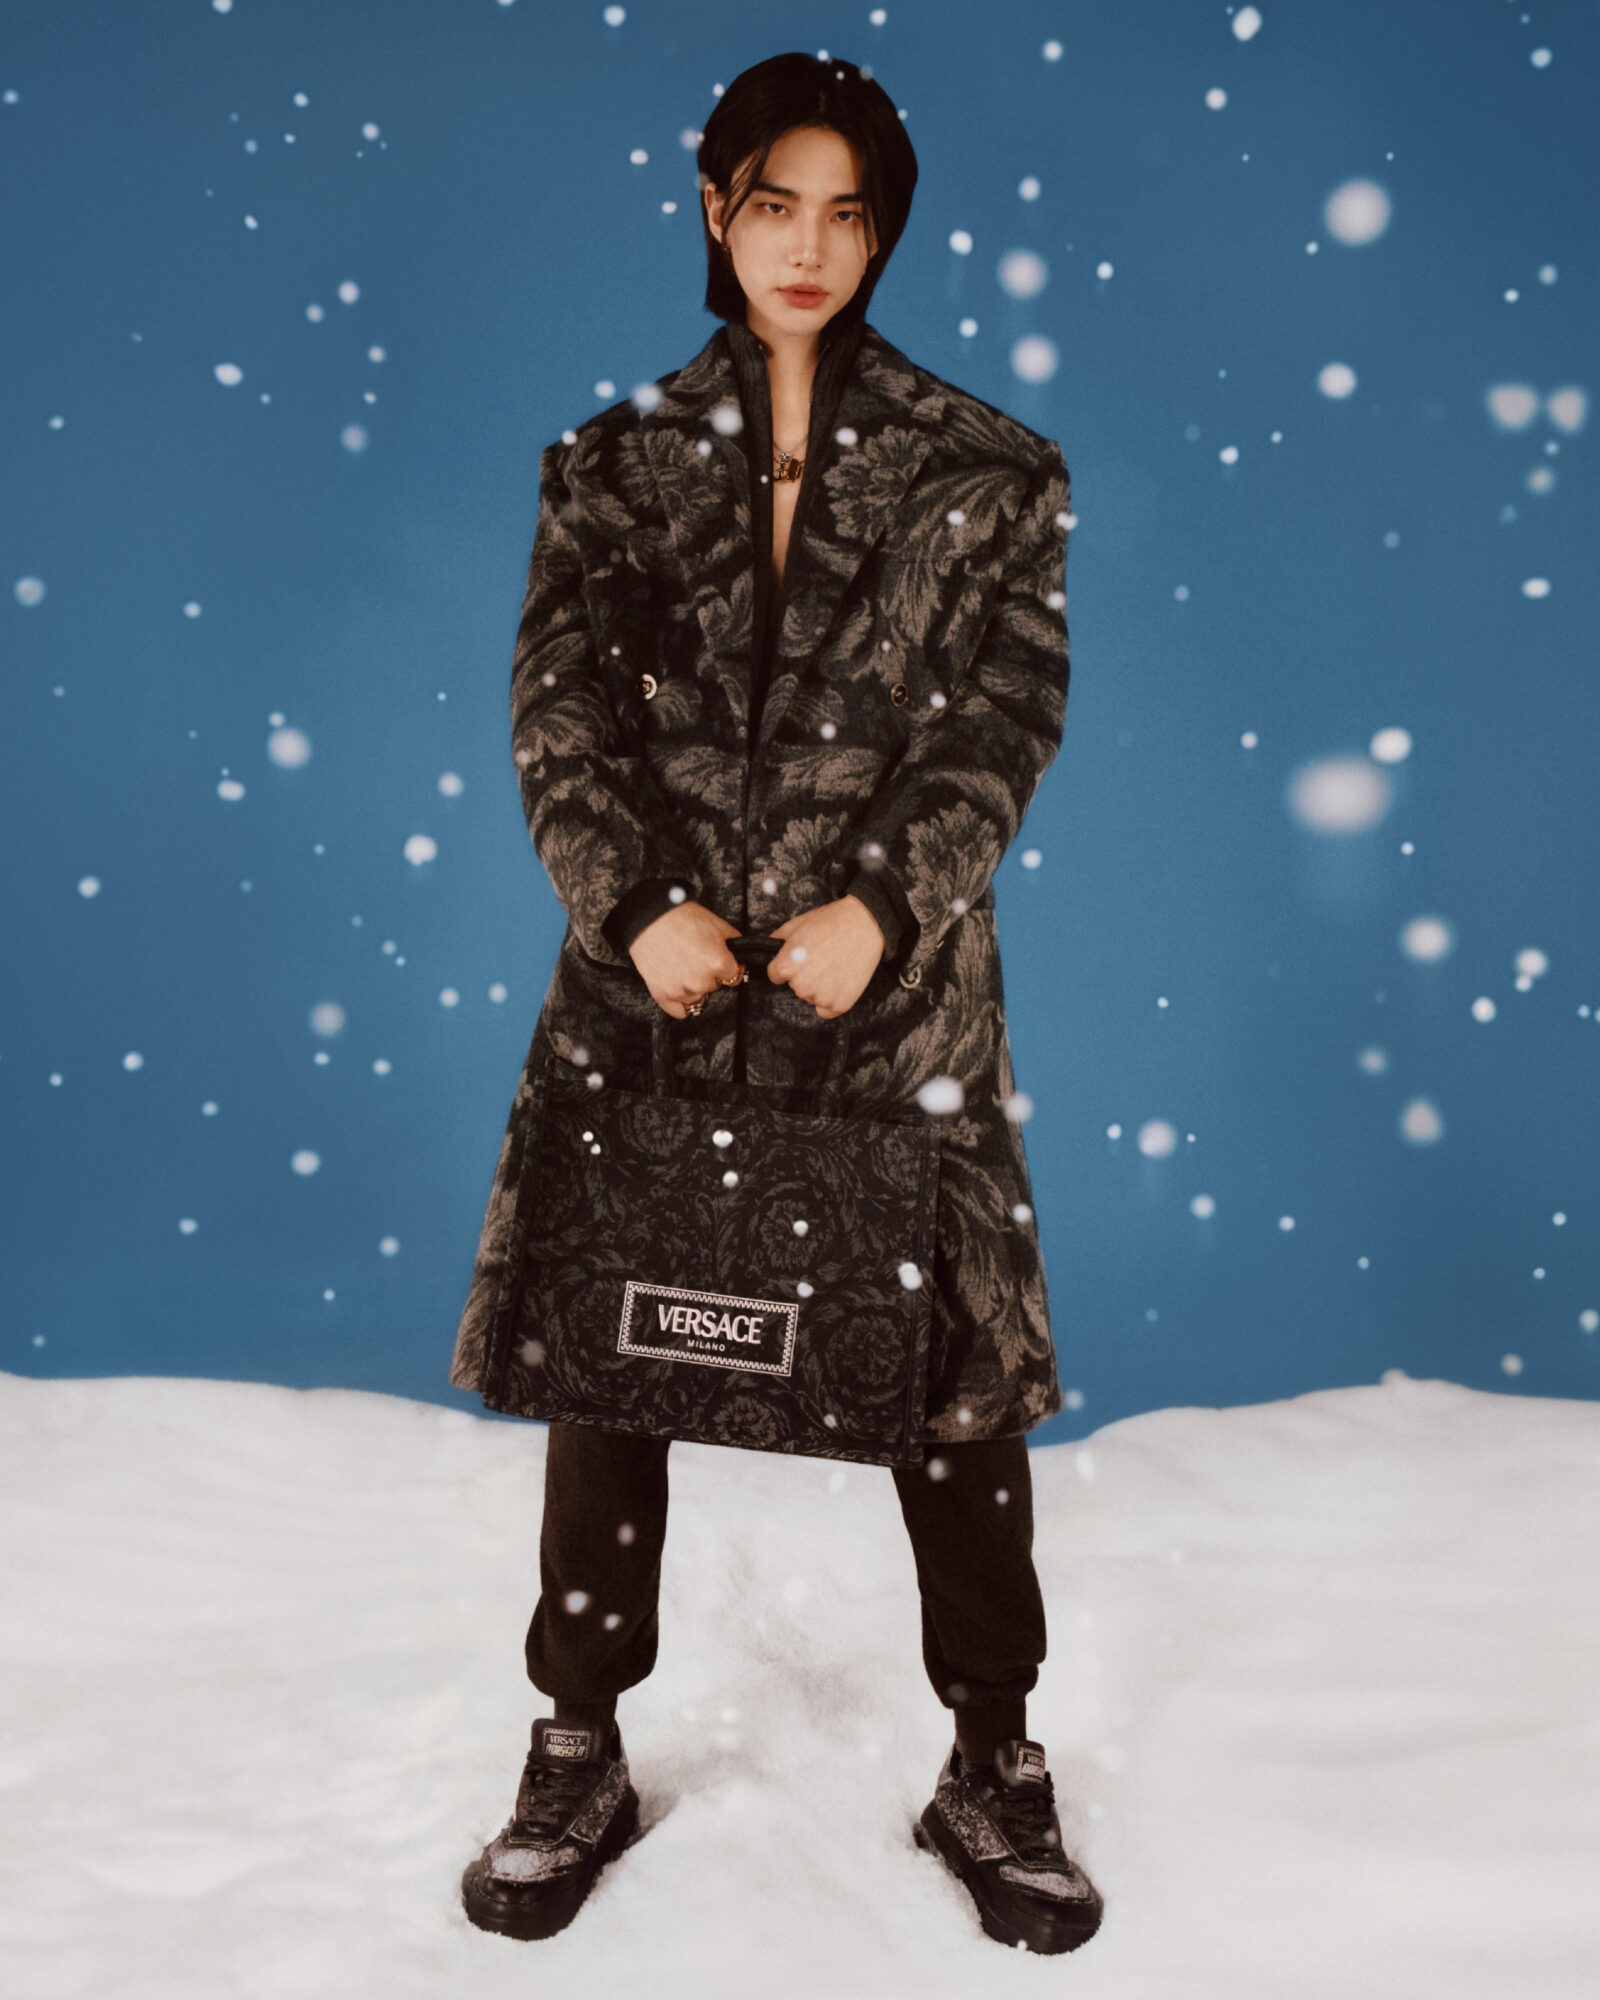 Winter wonder: Hyunjin wraps up in a Versace Barocco-print coat, ready to take on the festive chill with style.